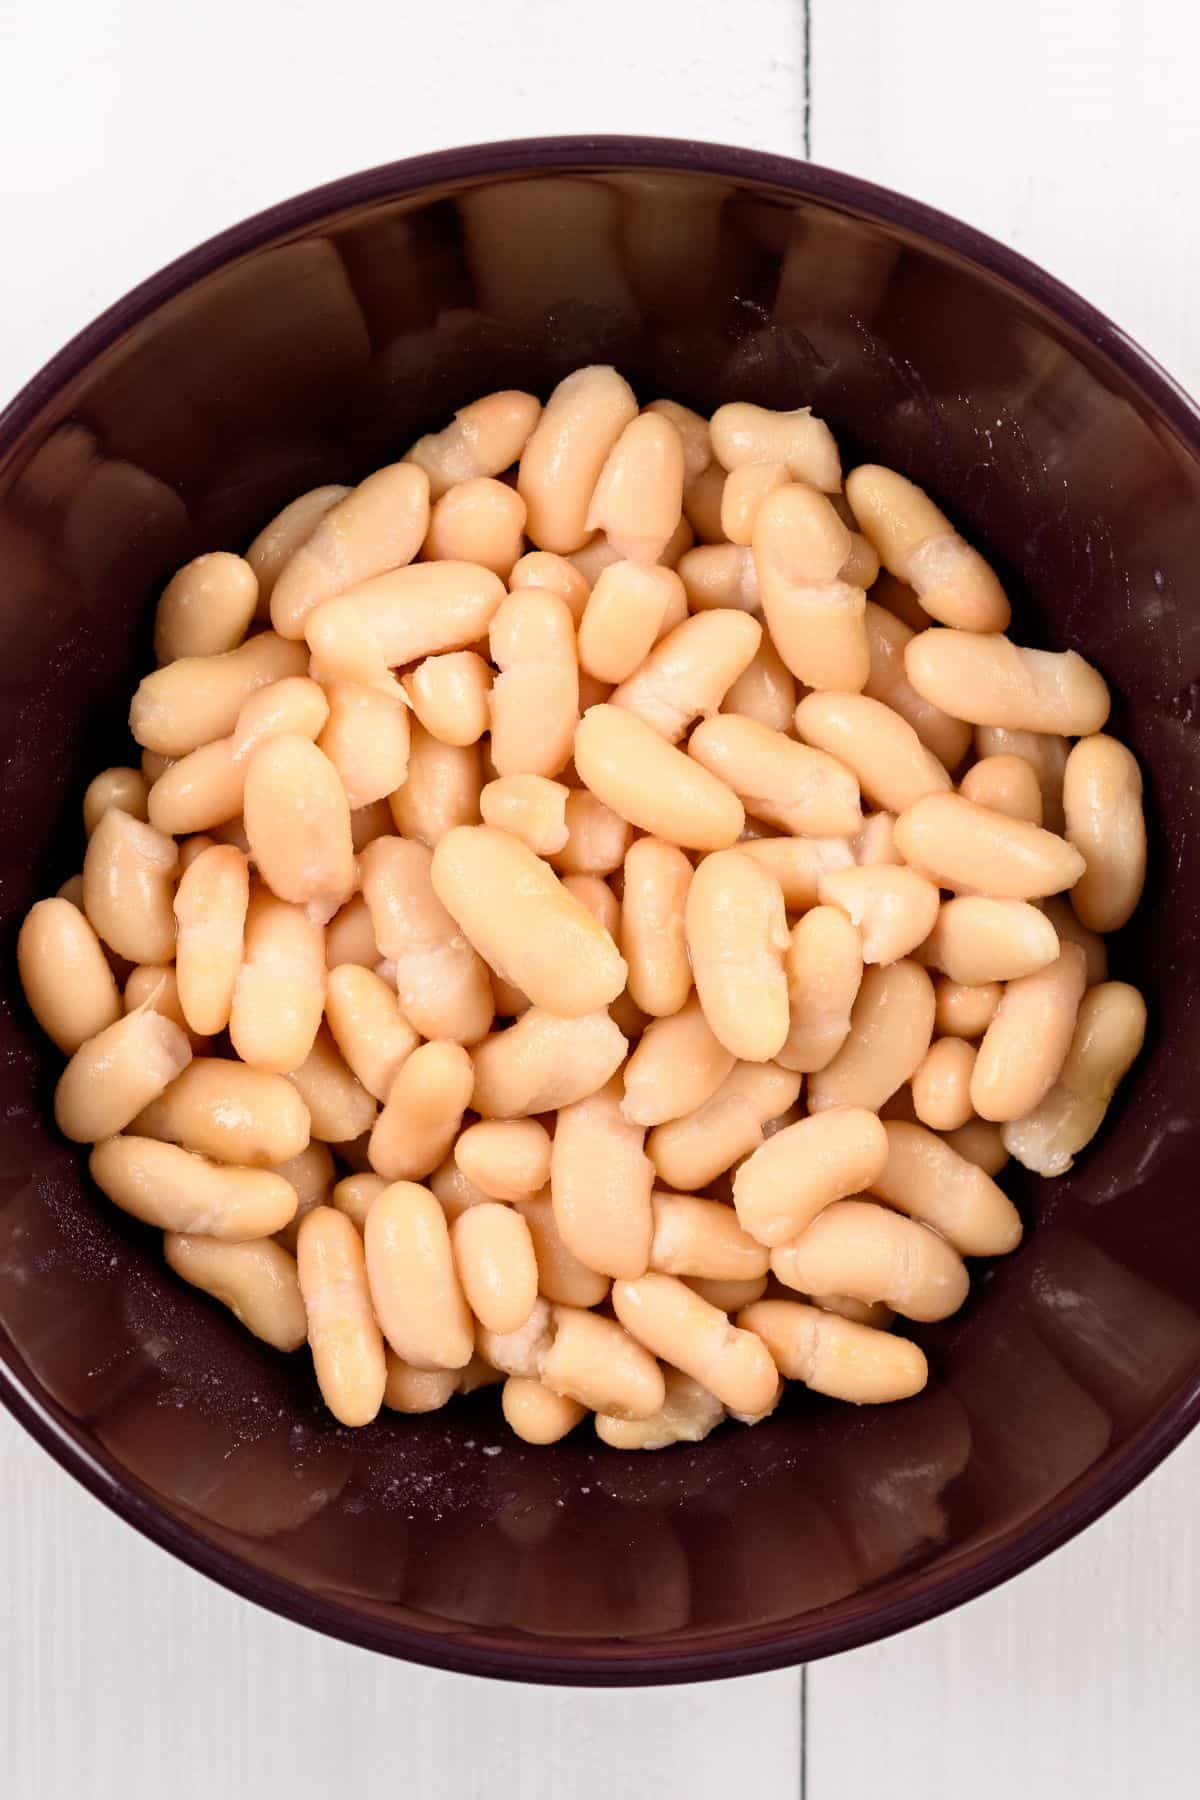 white beans in a brown bowl.